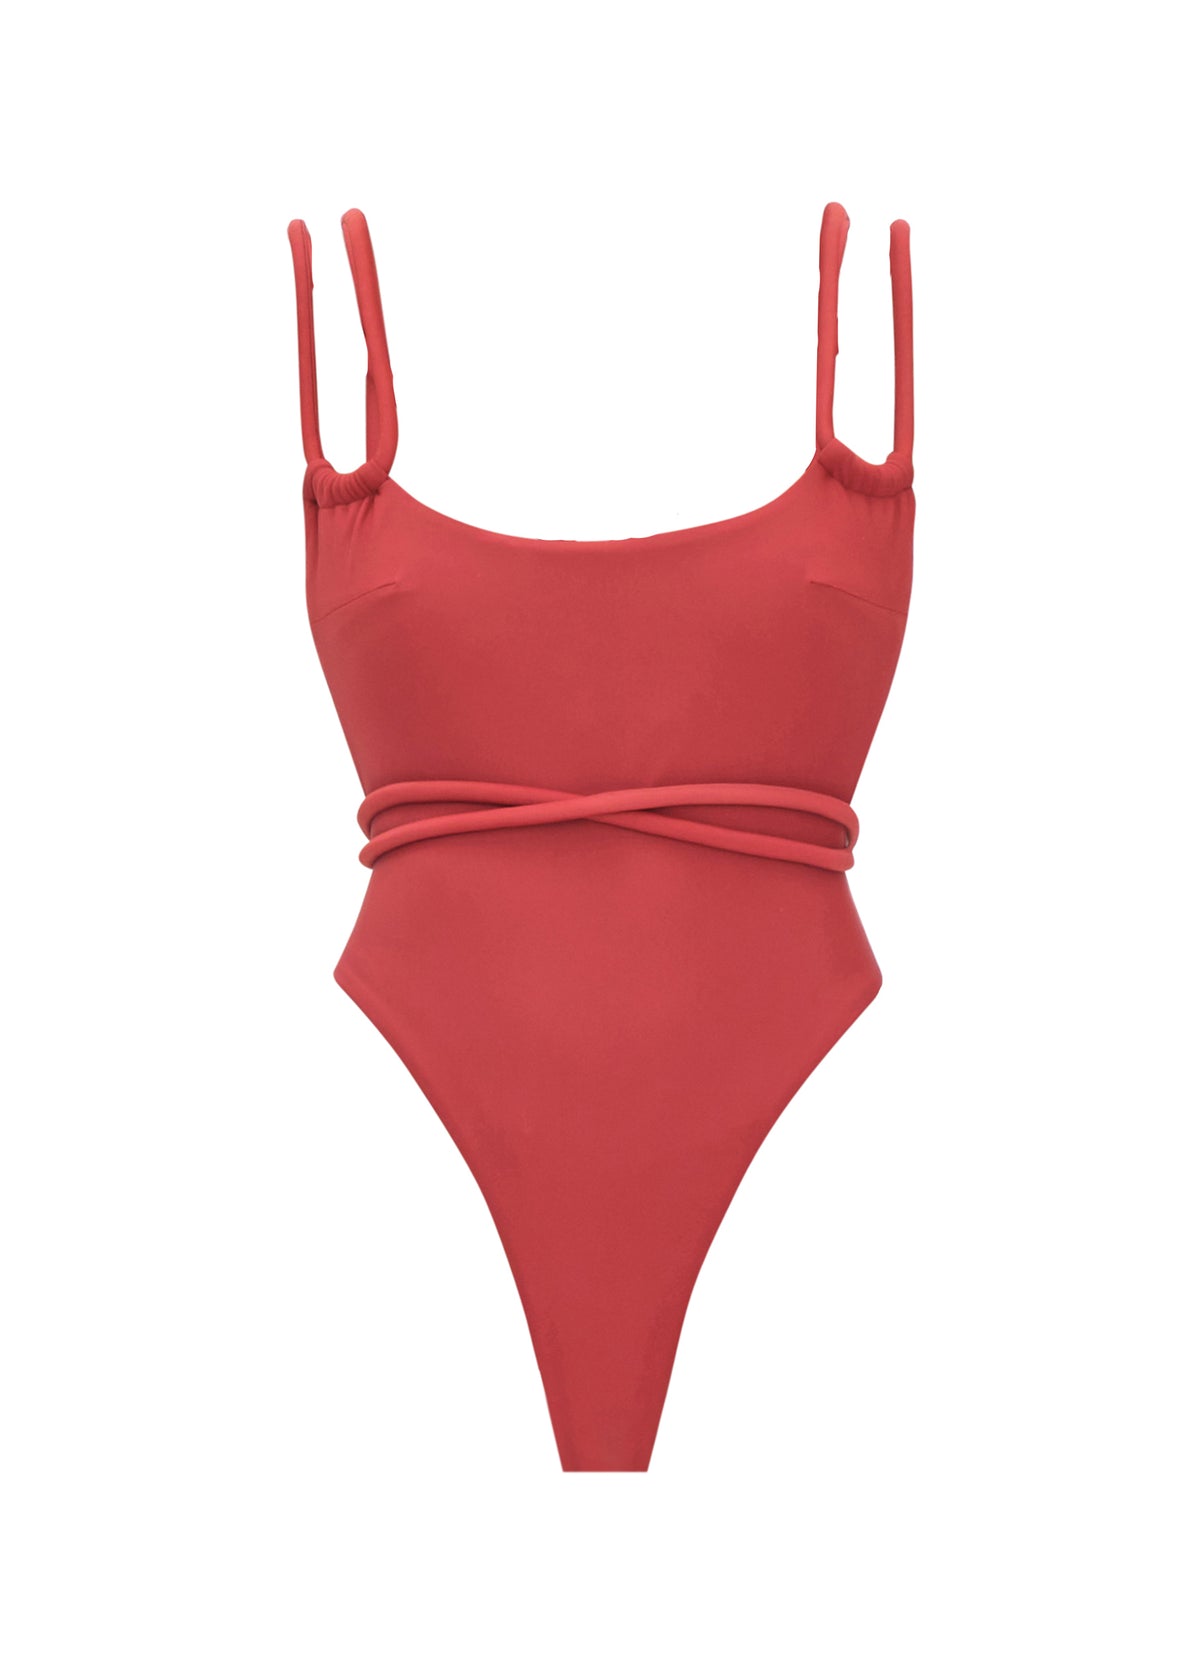 LIMA RED ONE PIECE SWIMSUIT